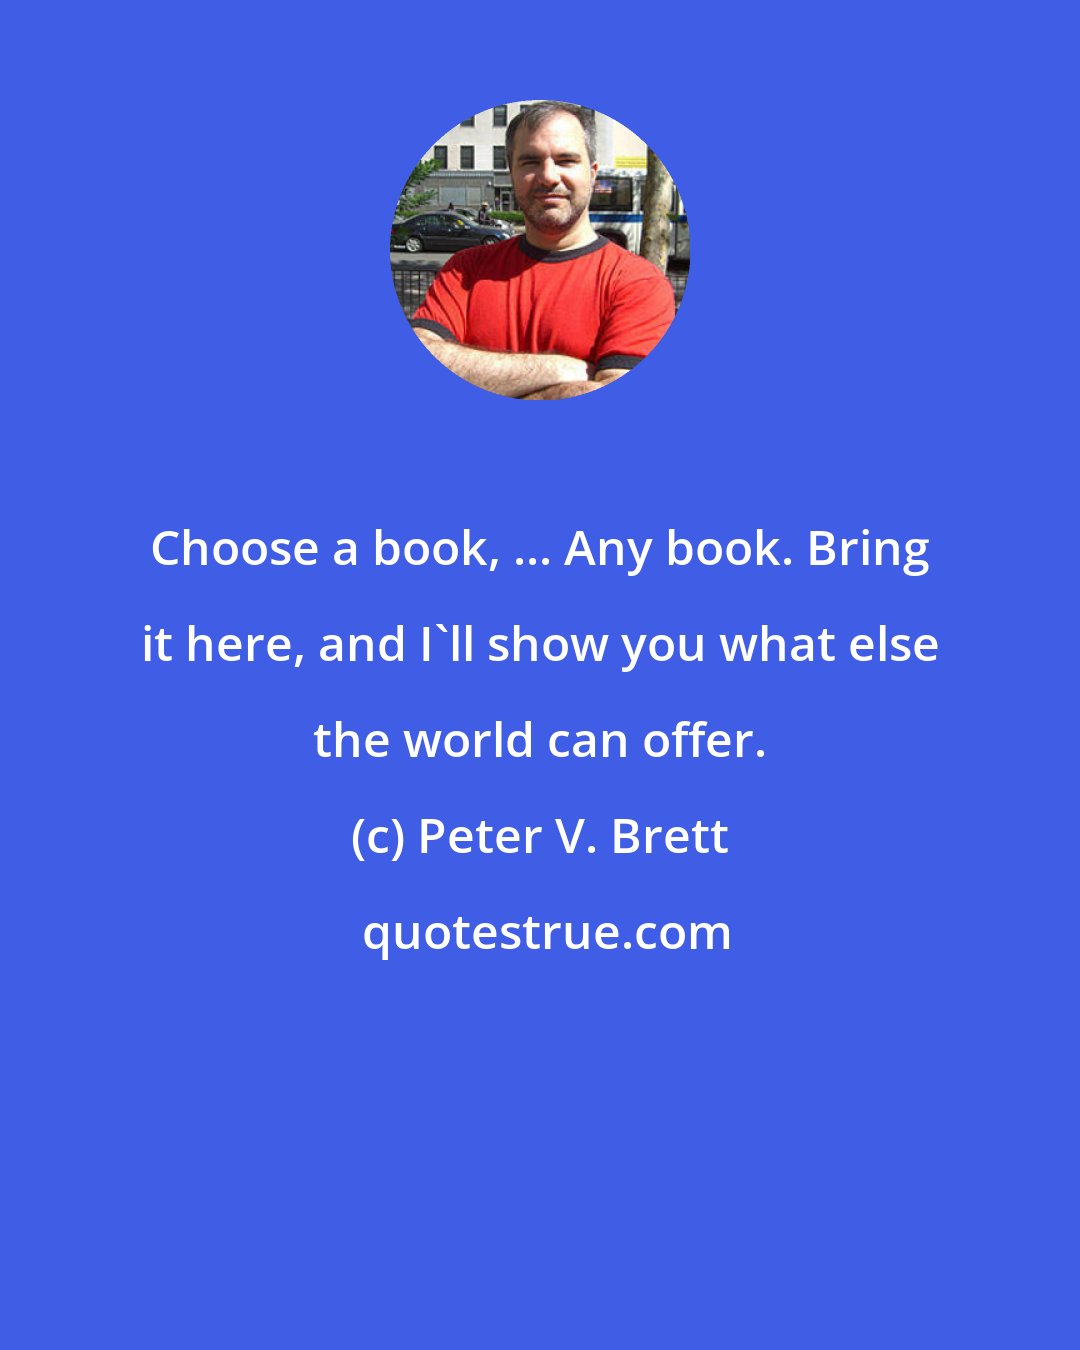 Peter V. Brett: Choose a book, ... Any book. Bring it here, and I'll show you what else the world can offer.